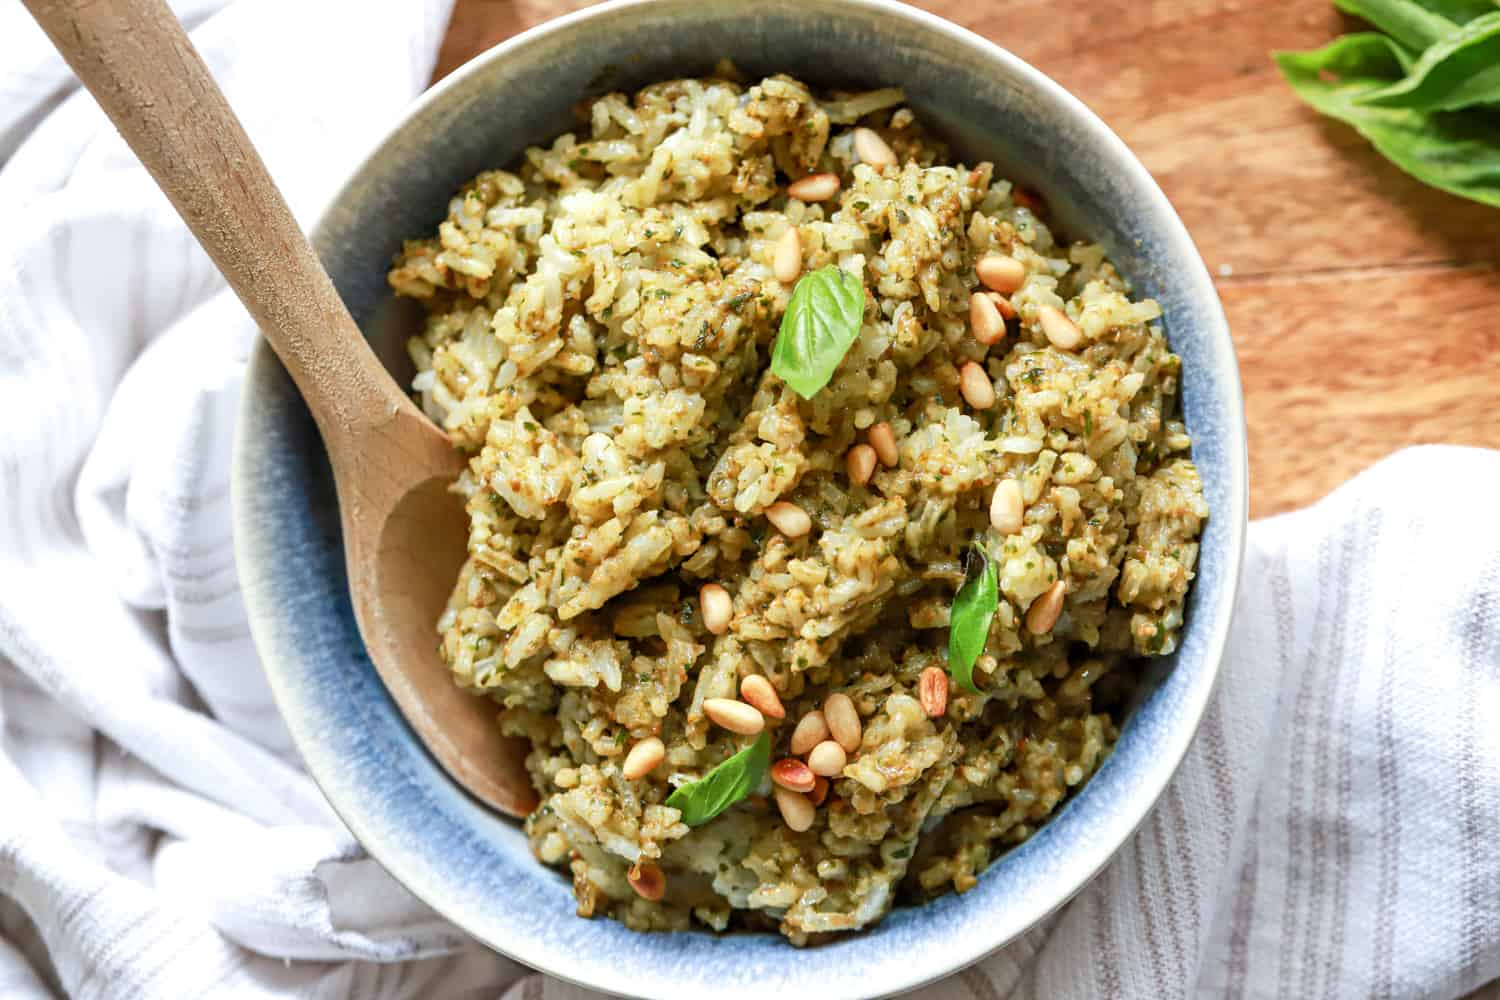 pesto rice in bowl with wooden spoon